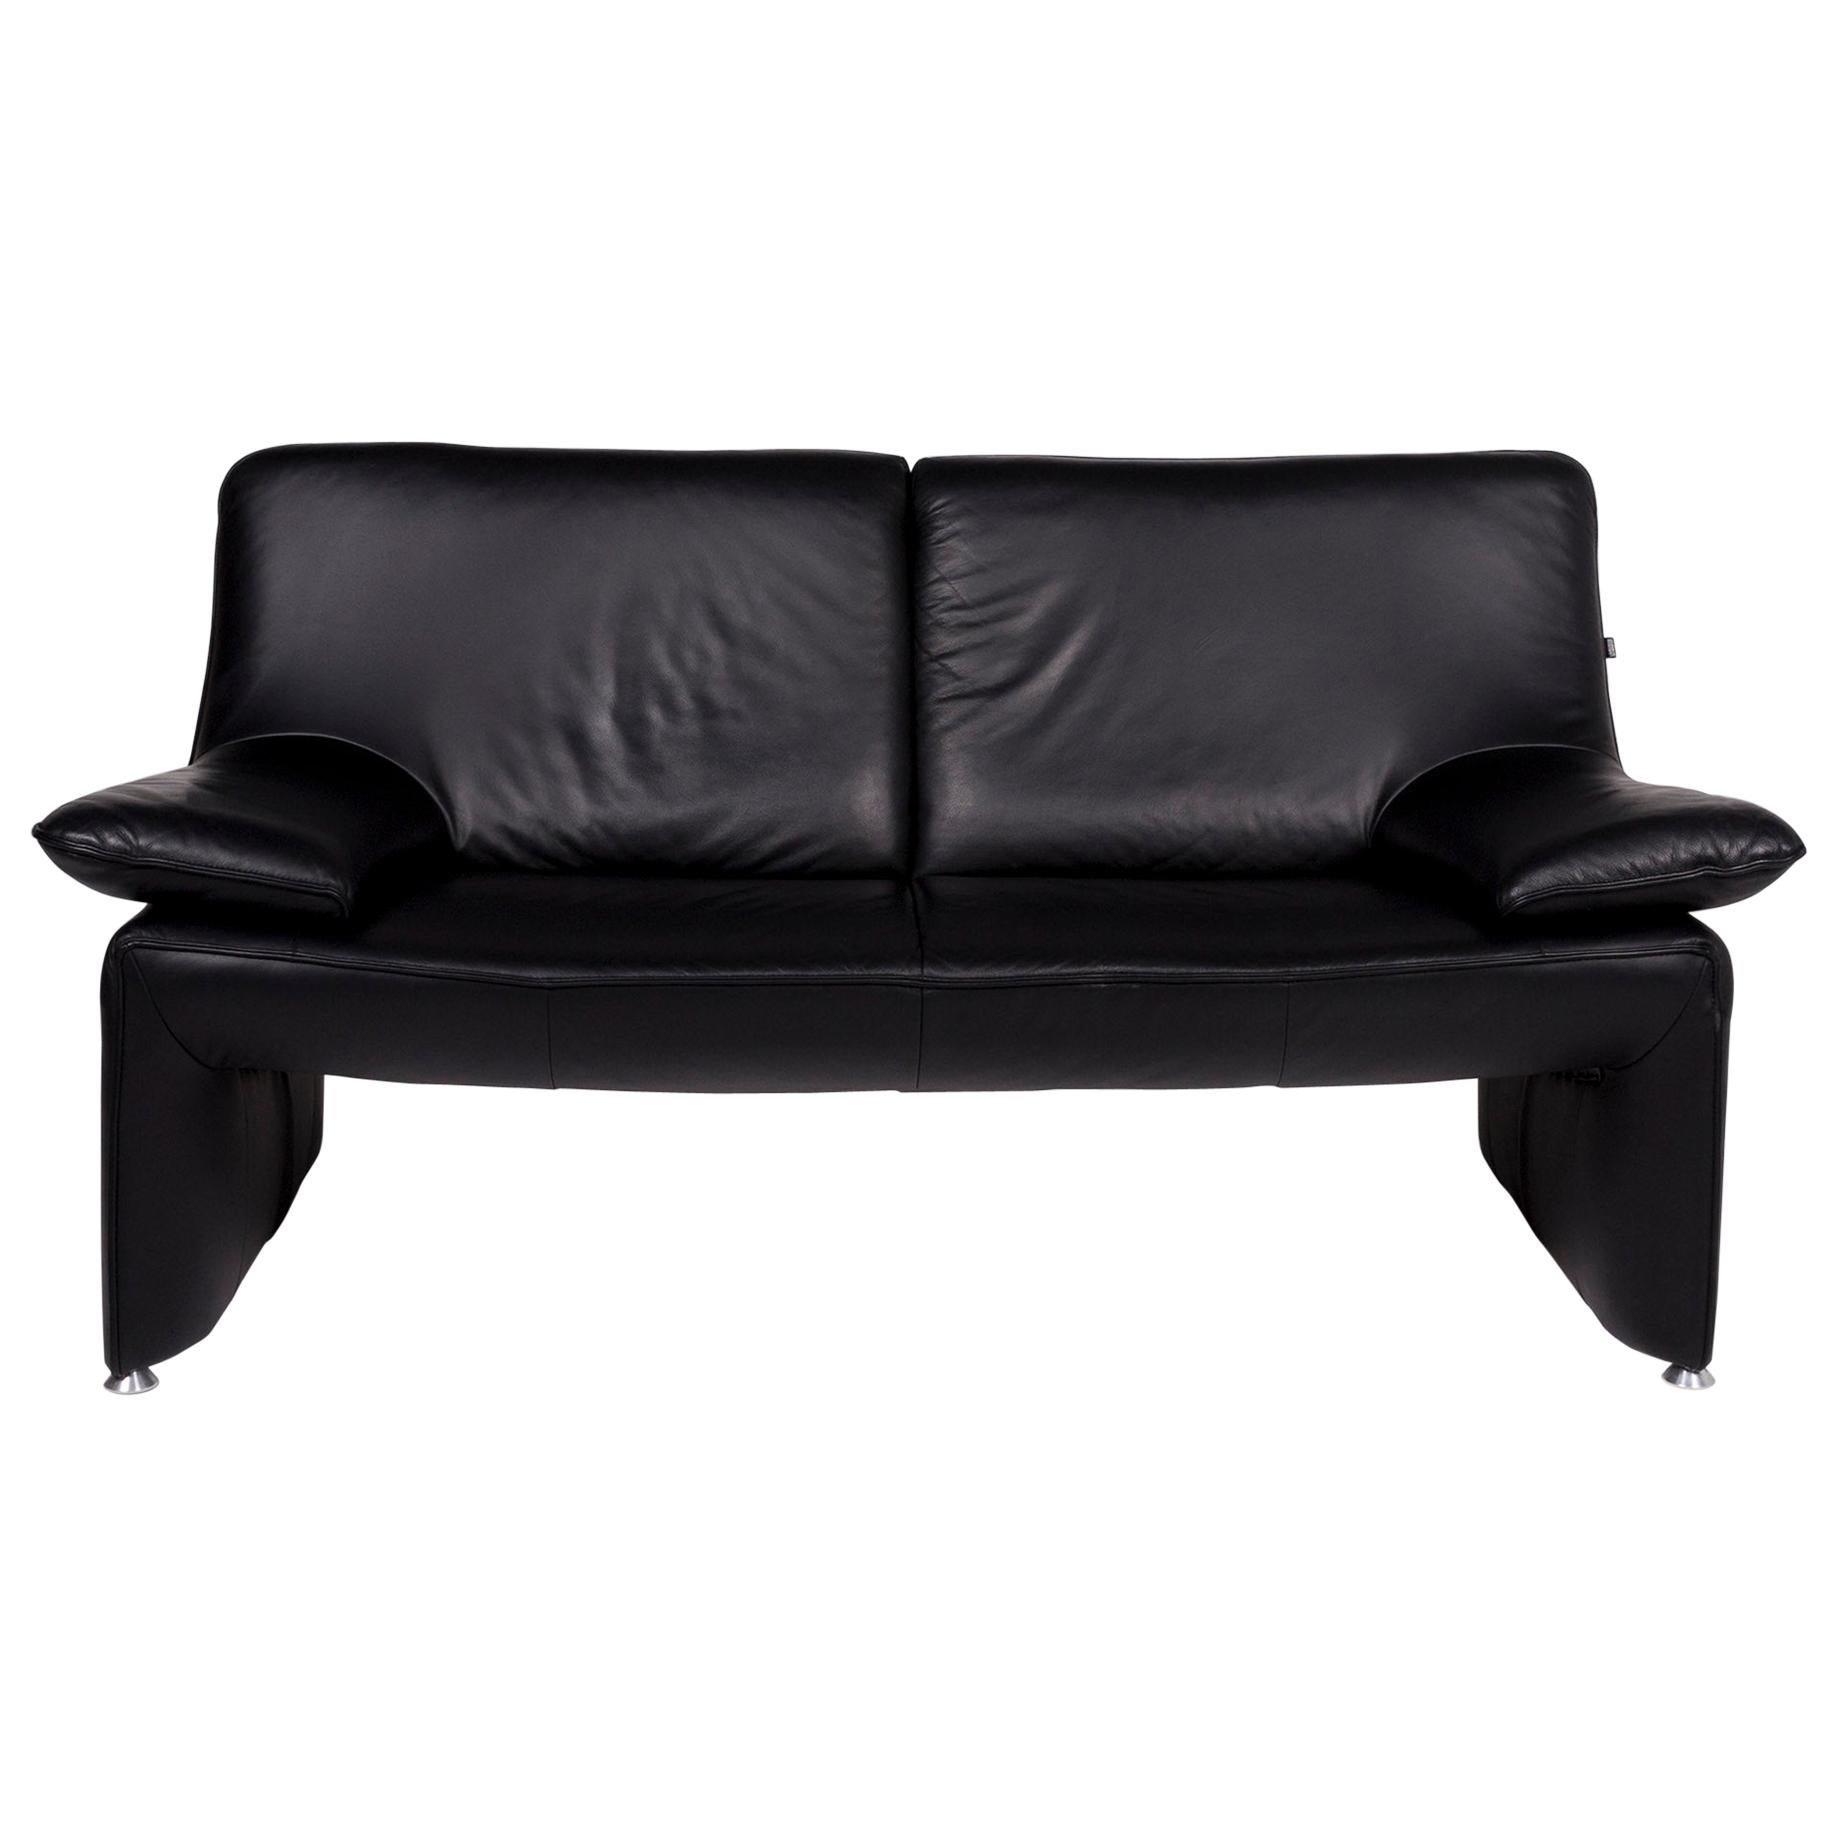 Laauser Leather Sofa Black Two-Seat Couch For Sale